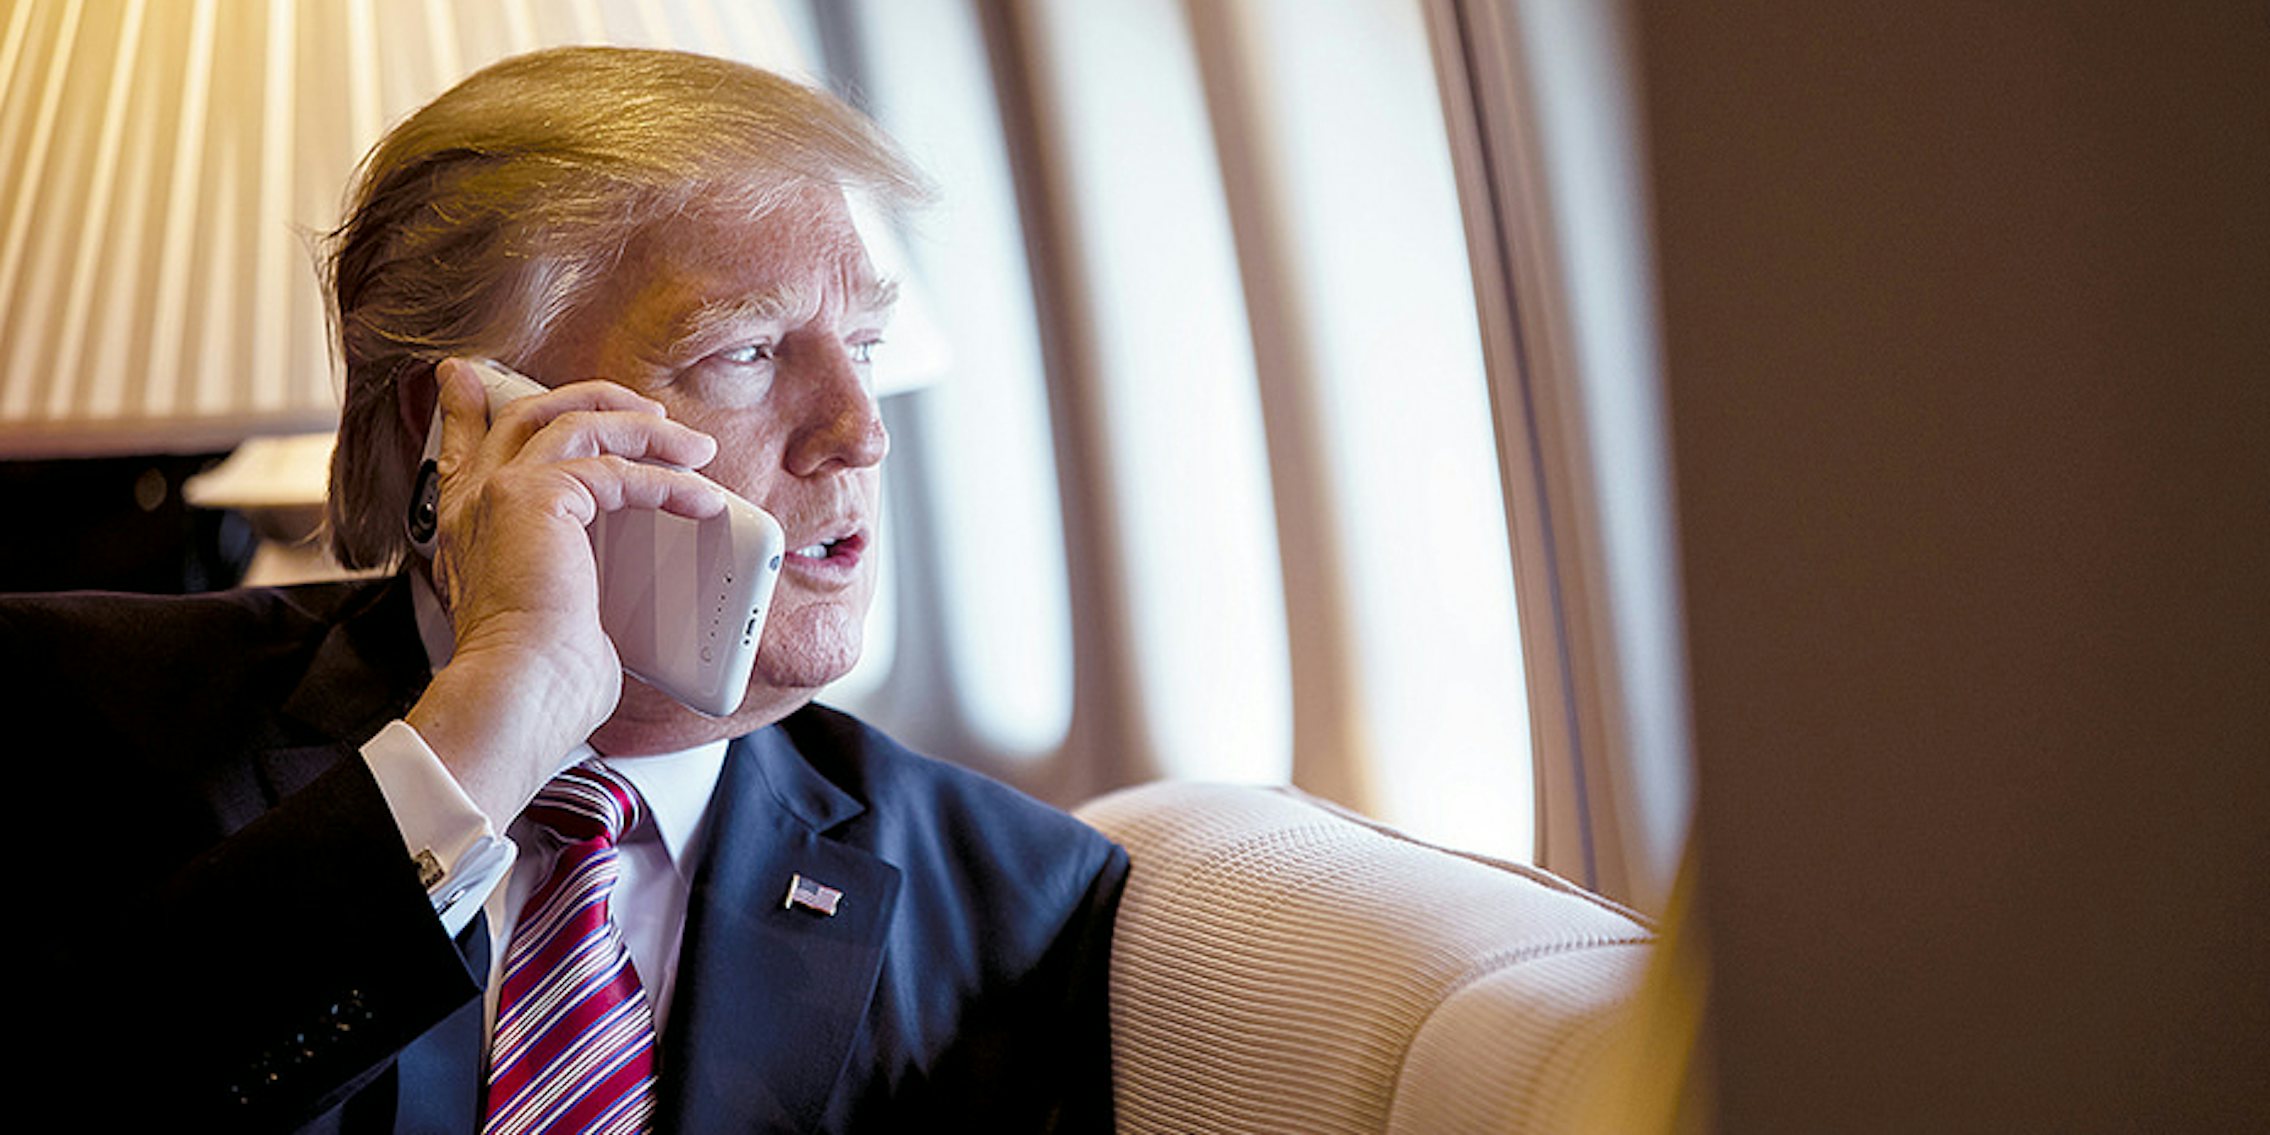 Trump Reportedly Thinks It's 'Inconvenient' To Get His iPhone Checked